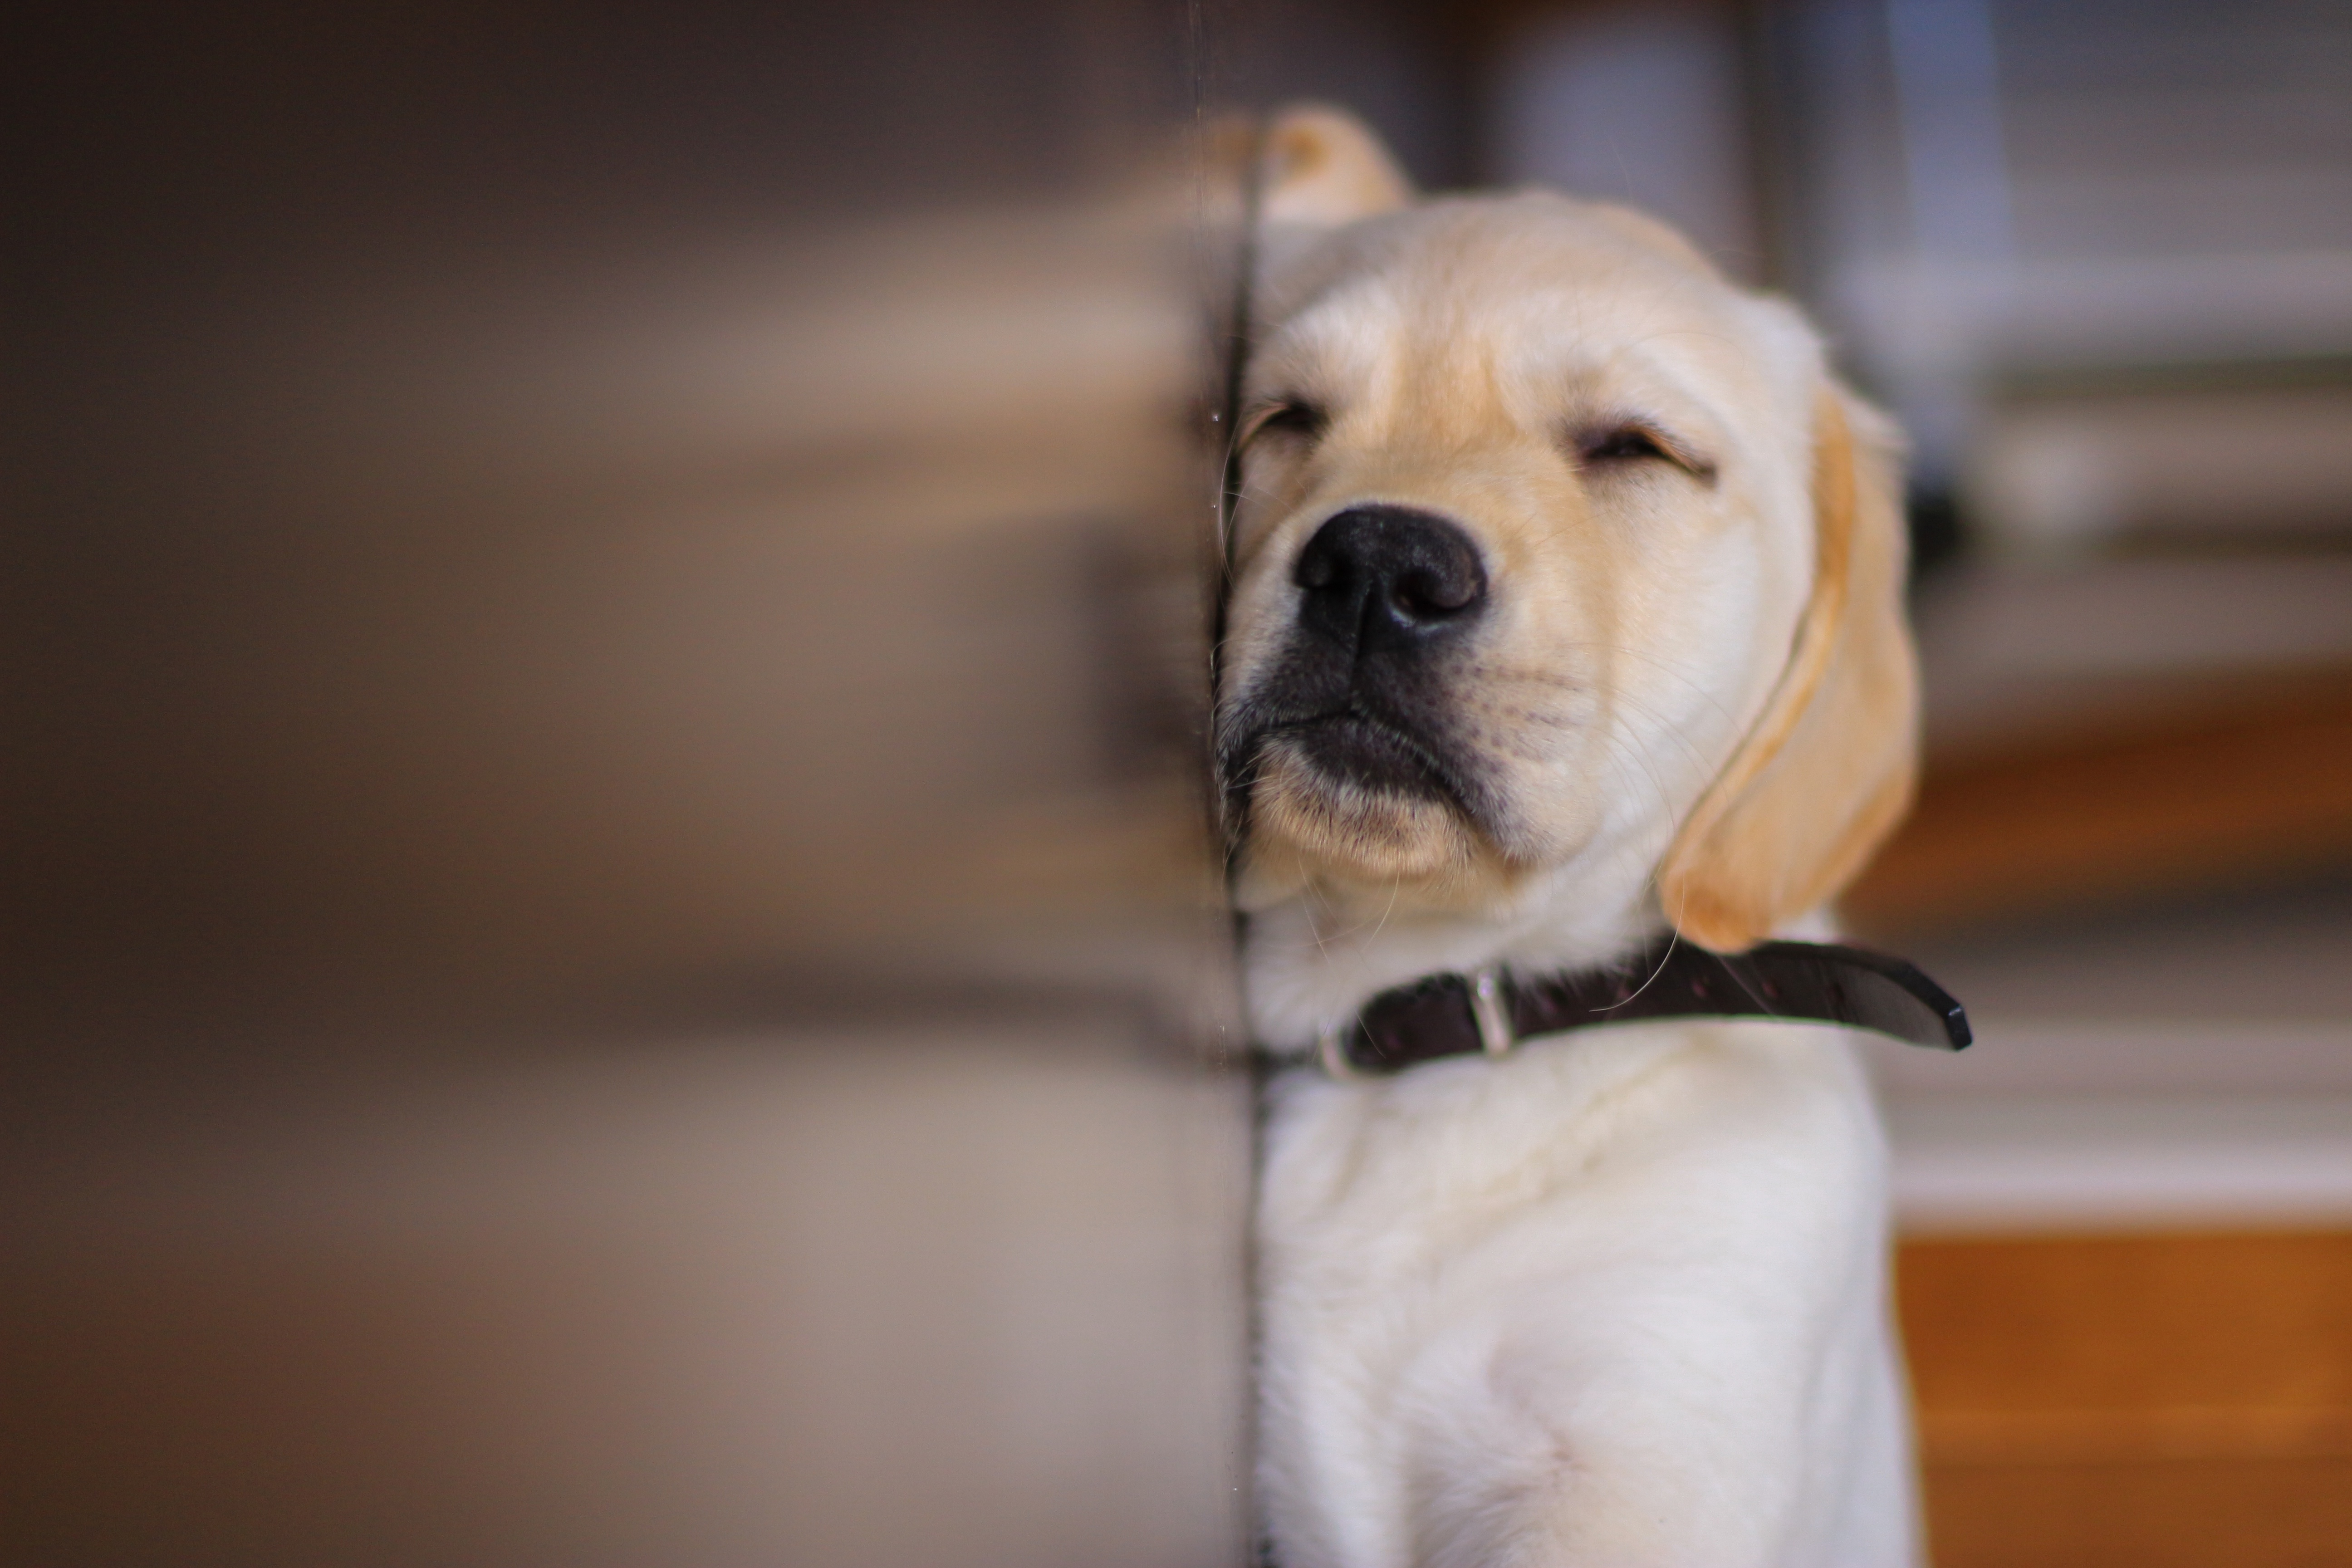 Free download wallpaper Dogs, Dog, Muzzle, Animal, Puppy, Golden Retriever, Sleeping on your PC desktop